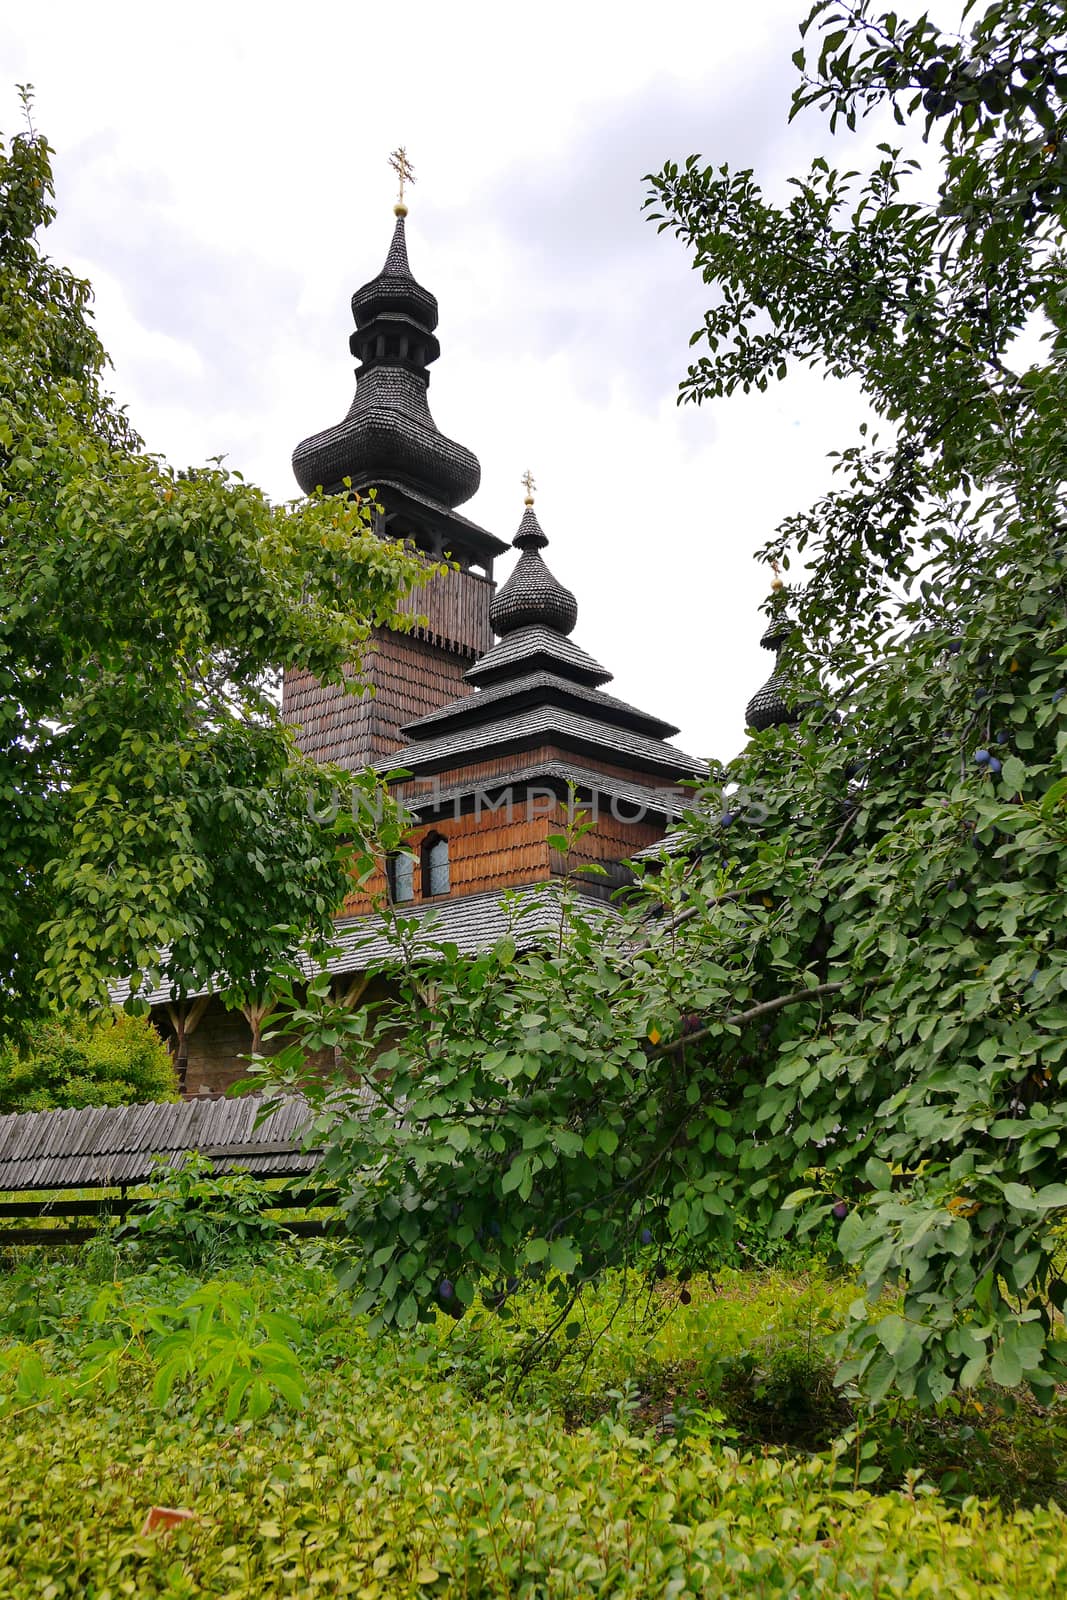 A wooden church with black domes hid behind tall, dense trees